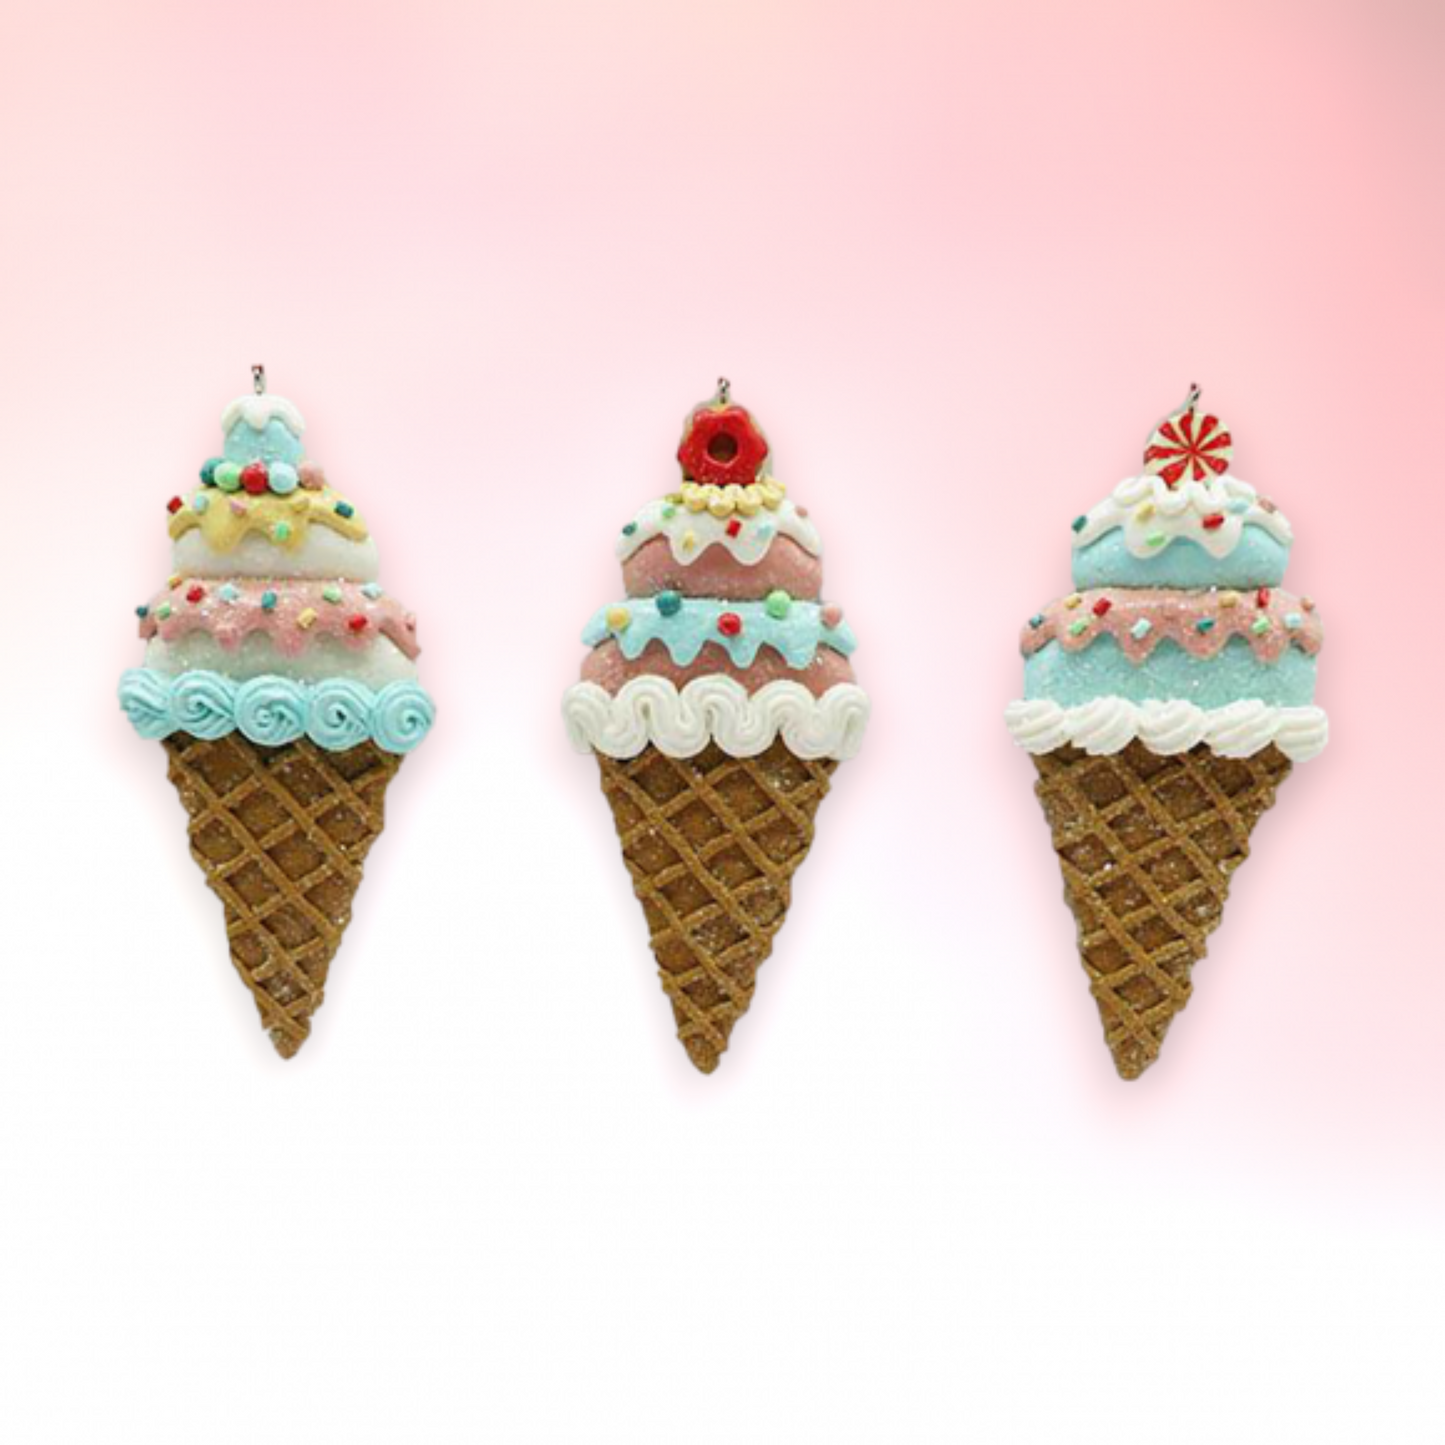 Candy Ice Cream Cone Cookie Ornaments